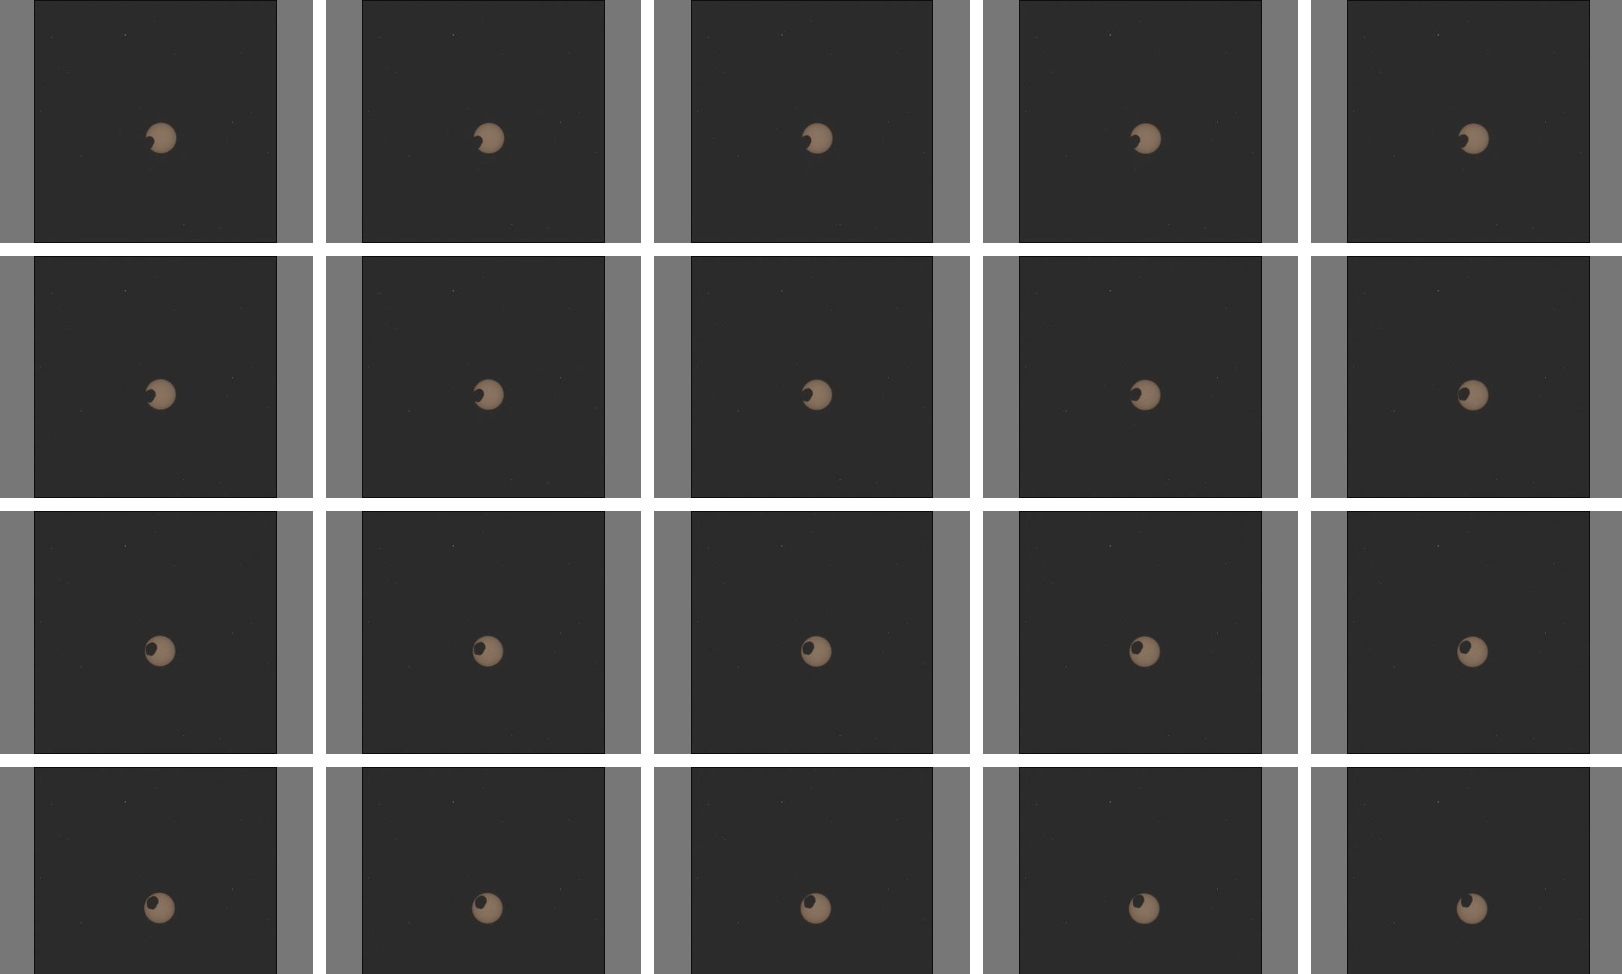 Gallery of Phobos solar eclipse thumbnails